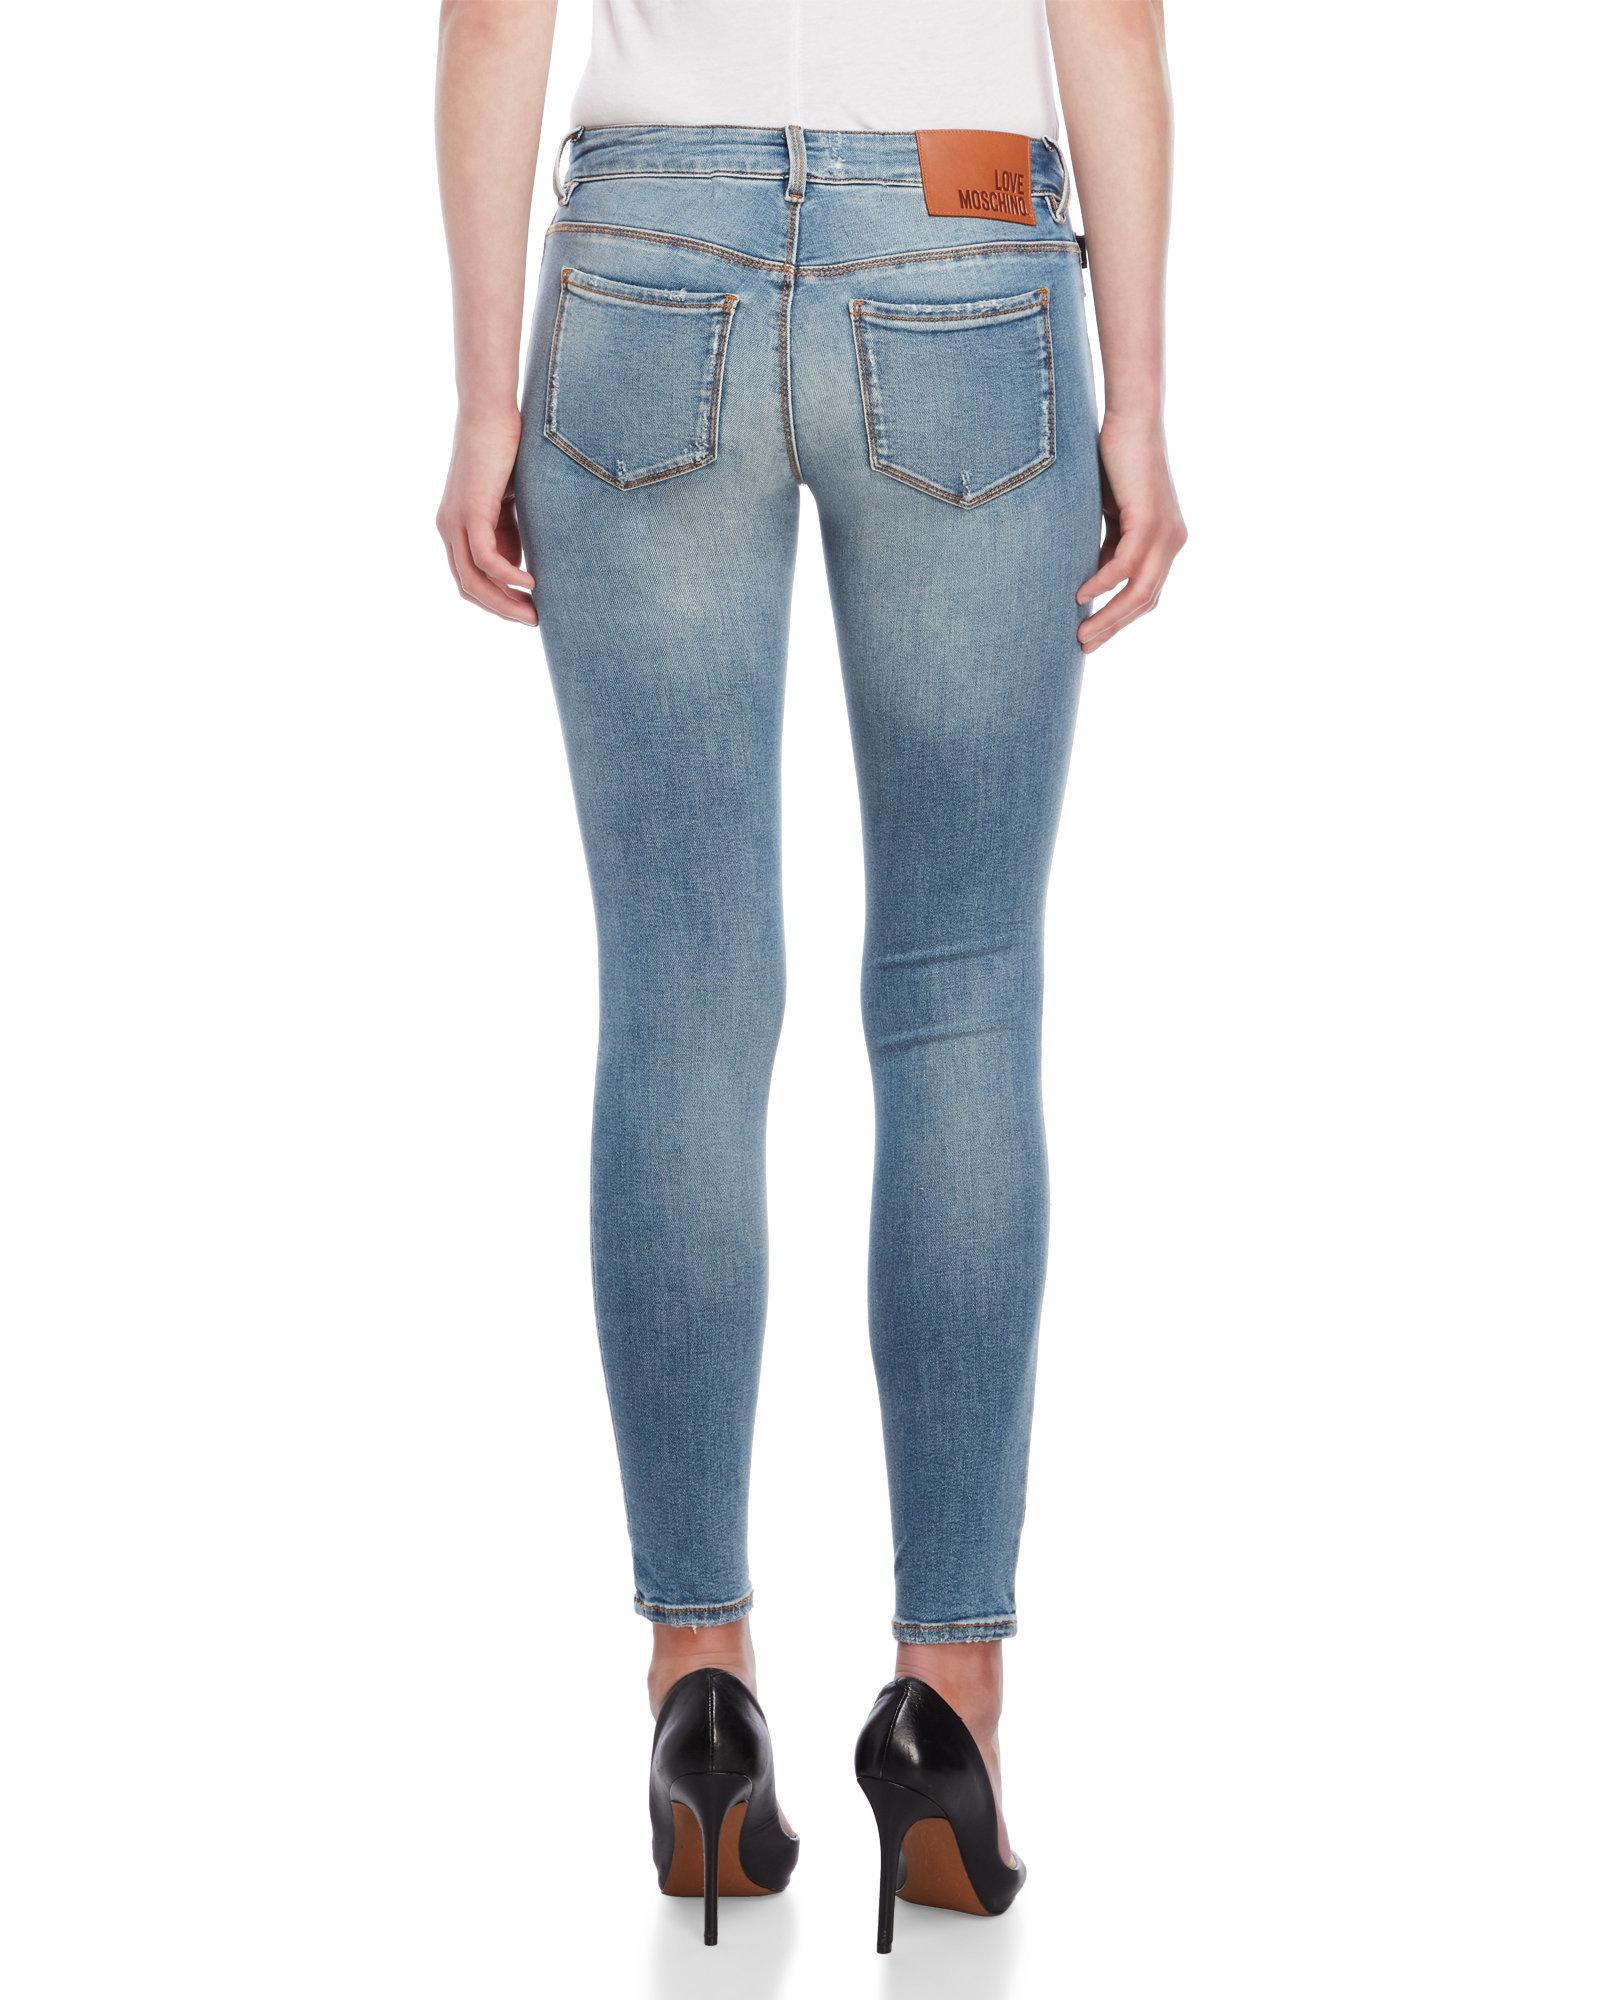 Lyst - Love Moschino Distressed Skinny Jeans in Blue